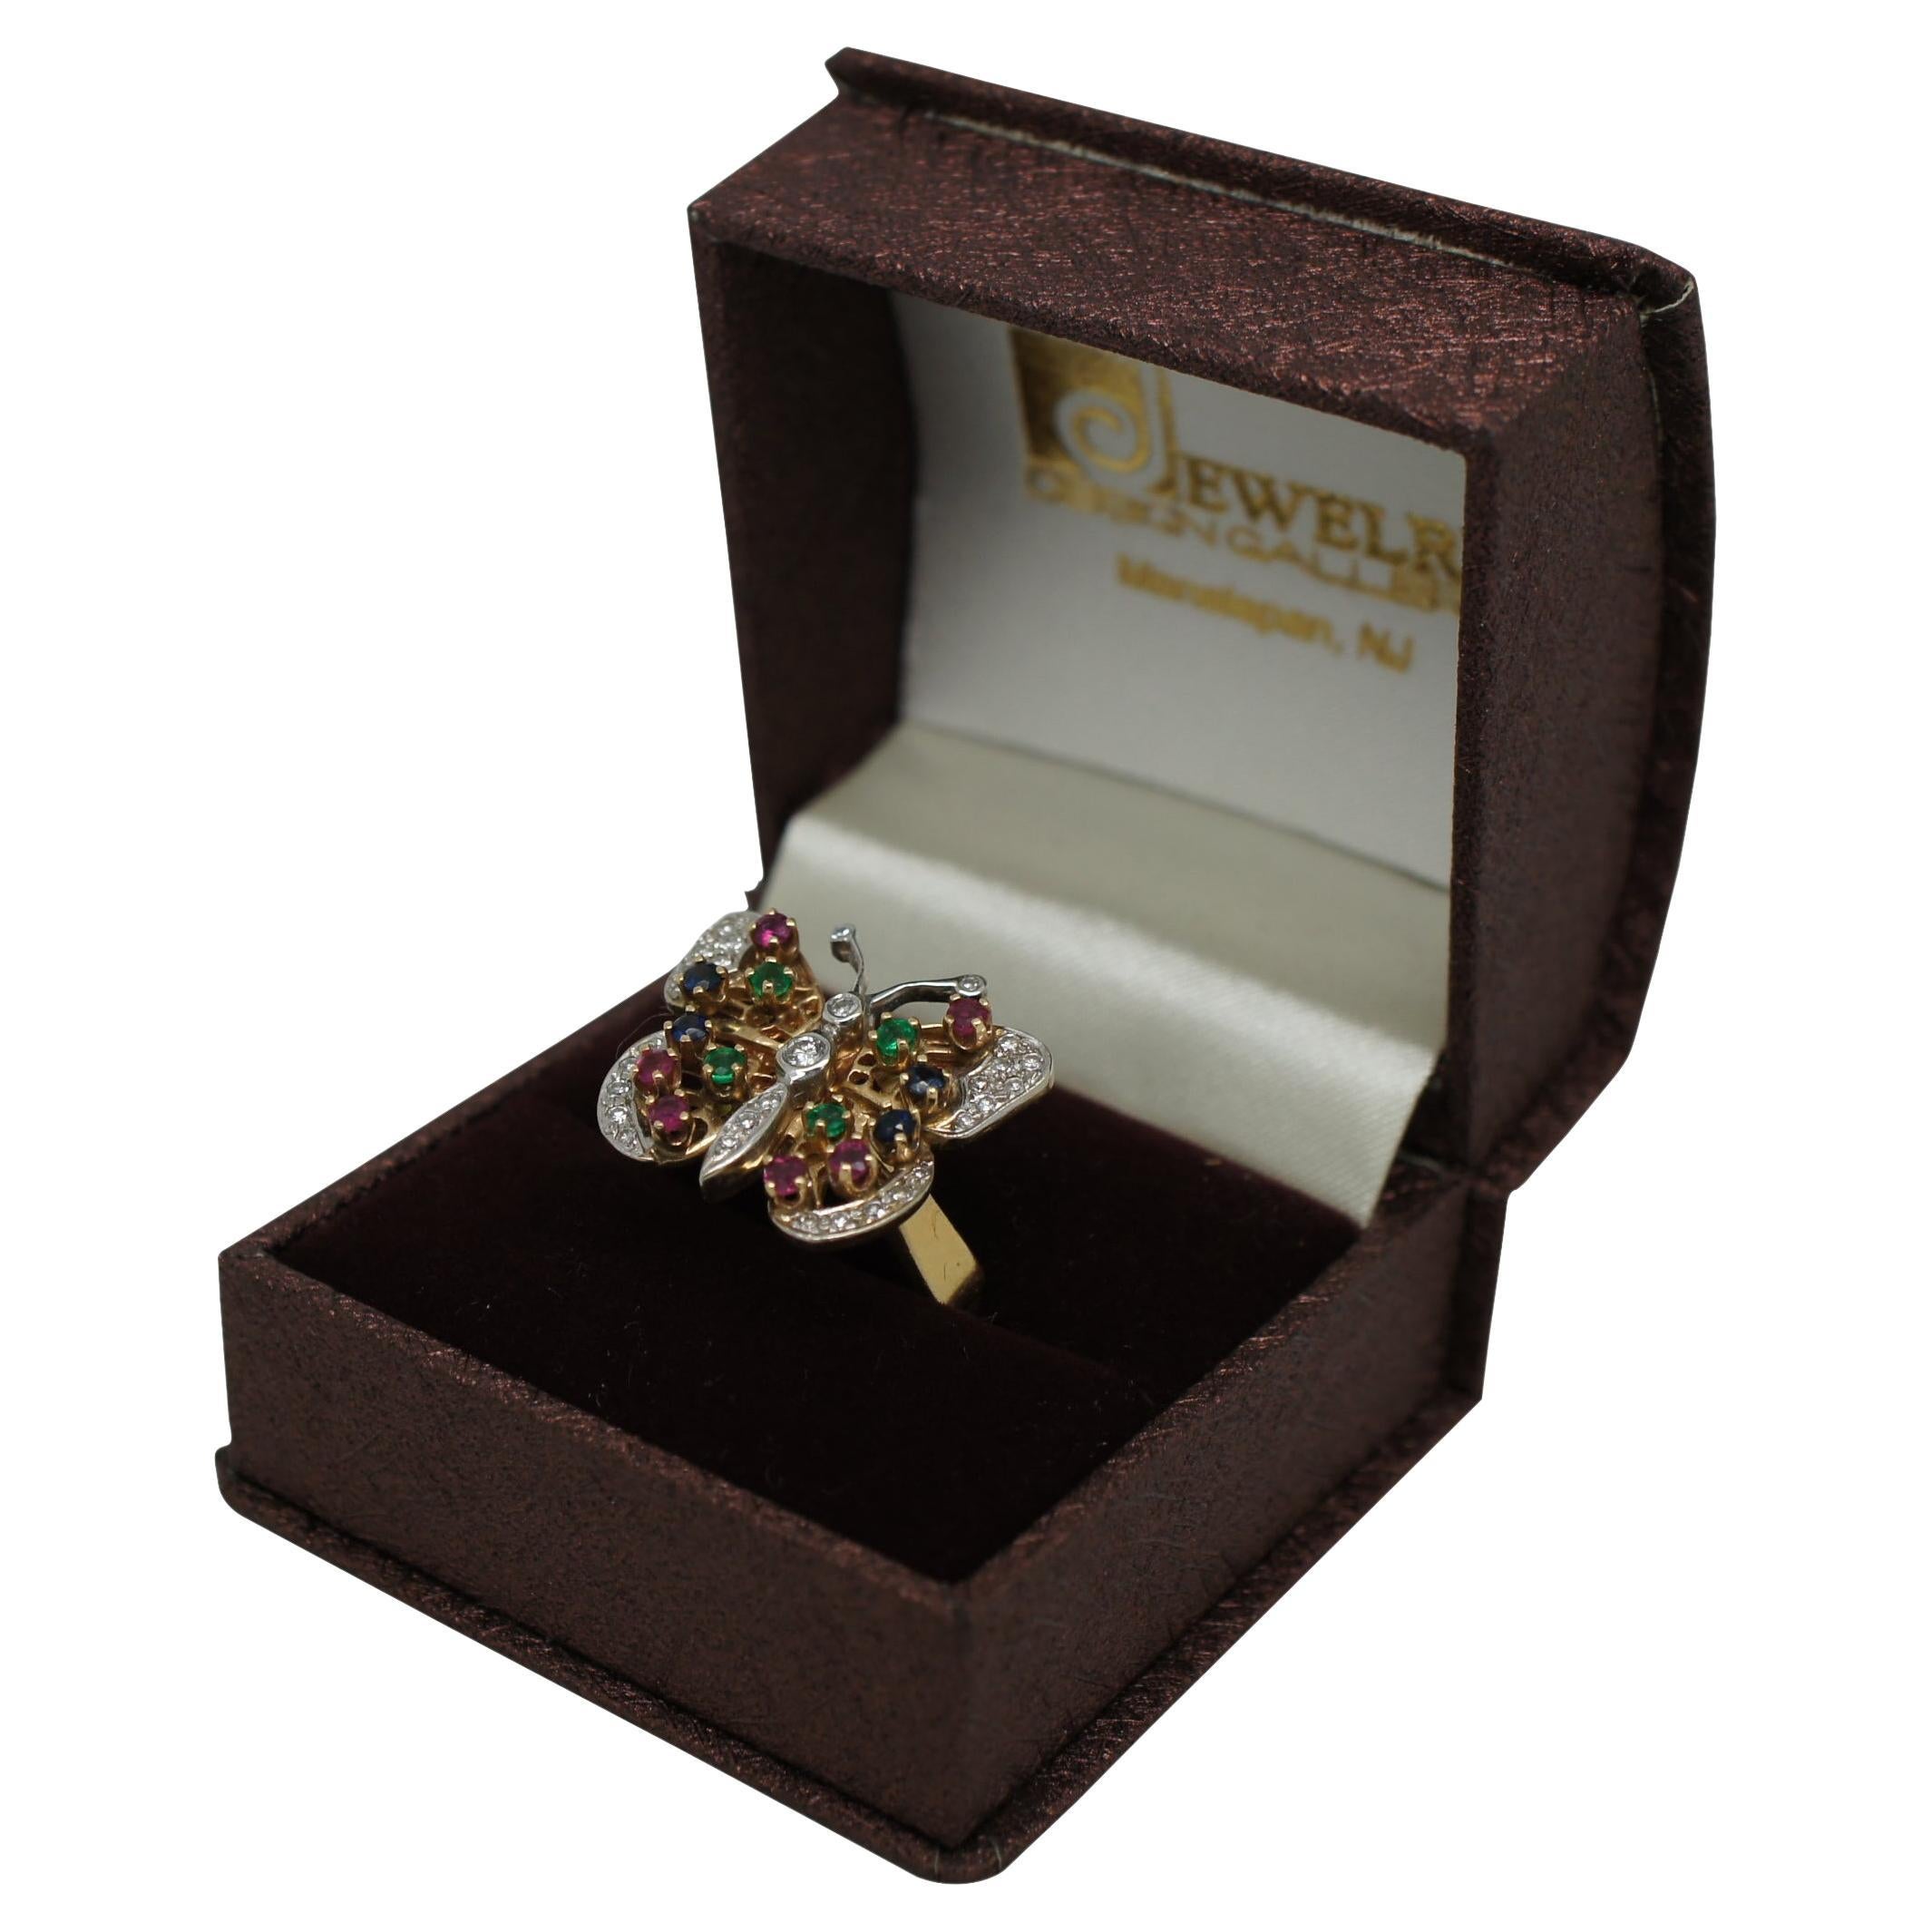 Vintage 1970s/1980s 14k yellow and white gold ring in the shape of a butterfly decorated with diamonds, emeralds, rubies and sapphires.

Size 8.25 / Setting -  1” x 0.75” (Width x Depth)